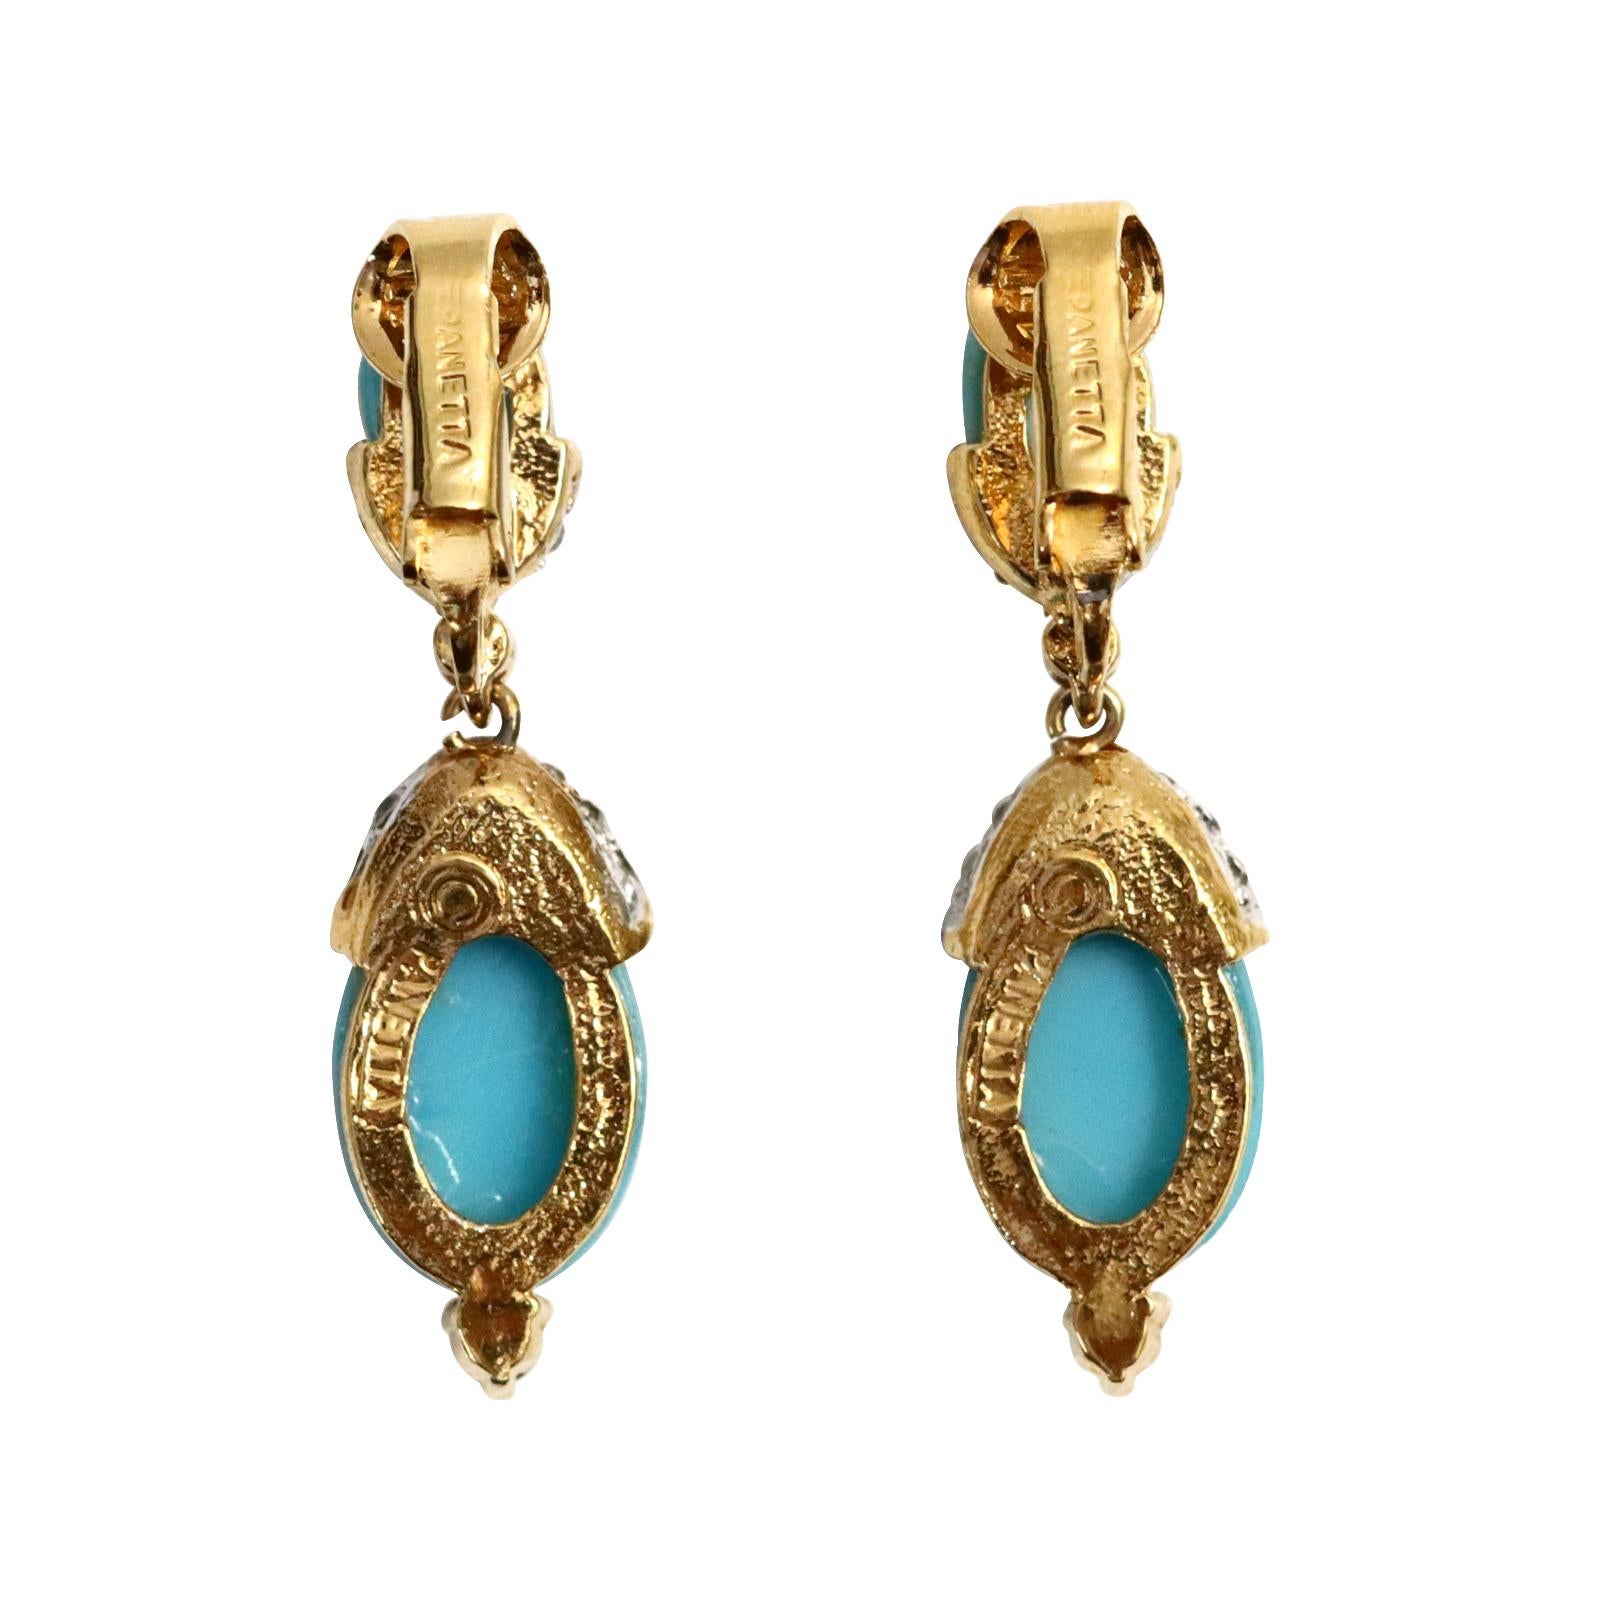 Modern Vintage Panetta Faux Turquoise Dangling Earrings Circa 1980s For Sale